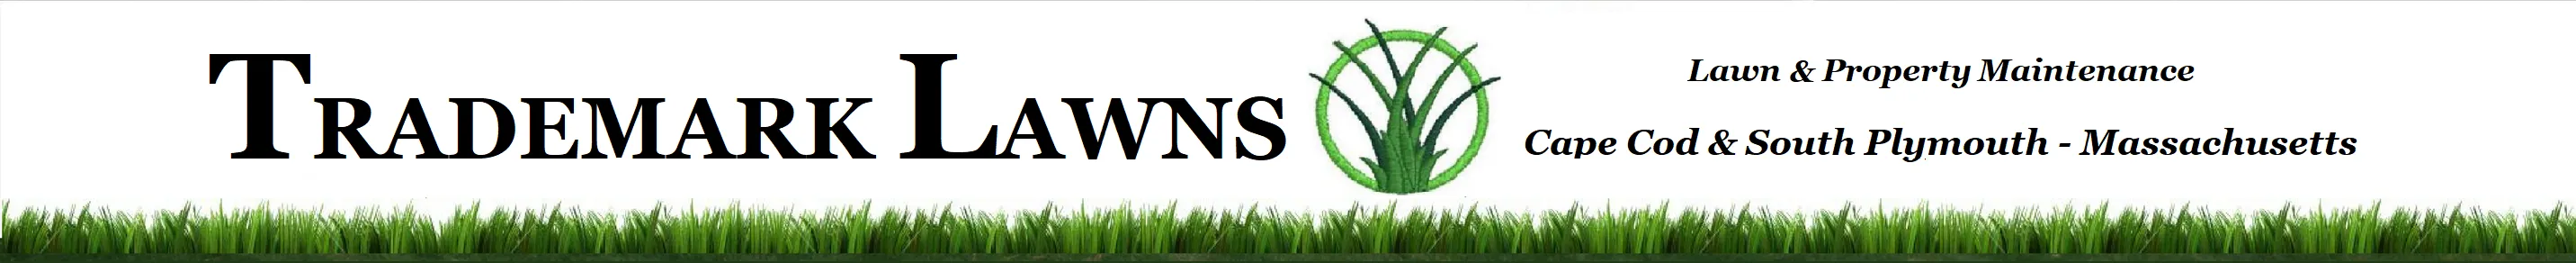 Trademark Lawns Lawn and Property Maintenance